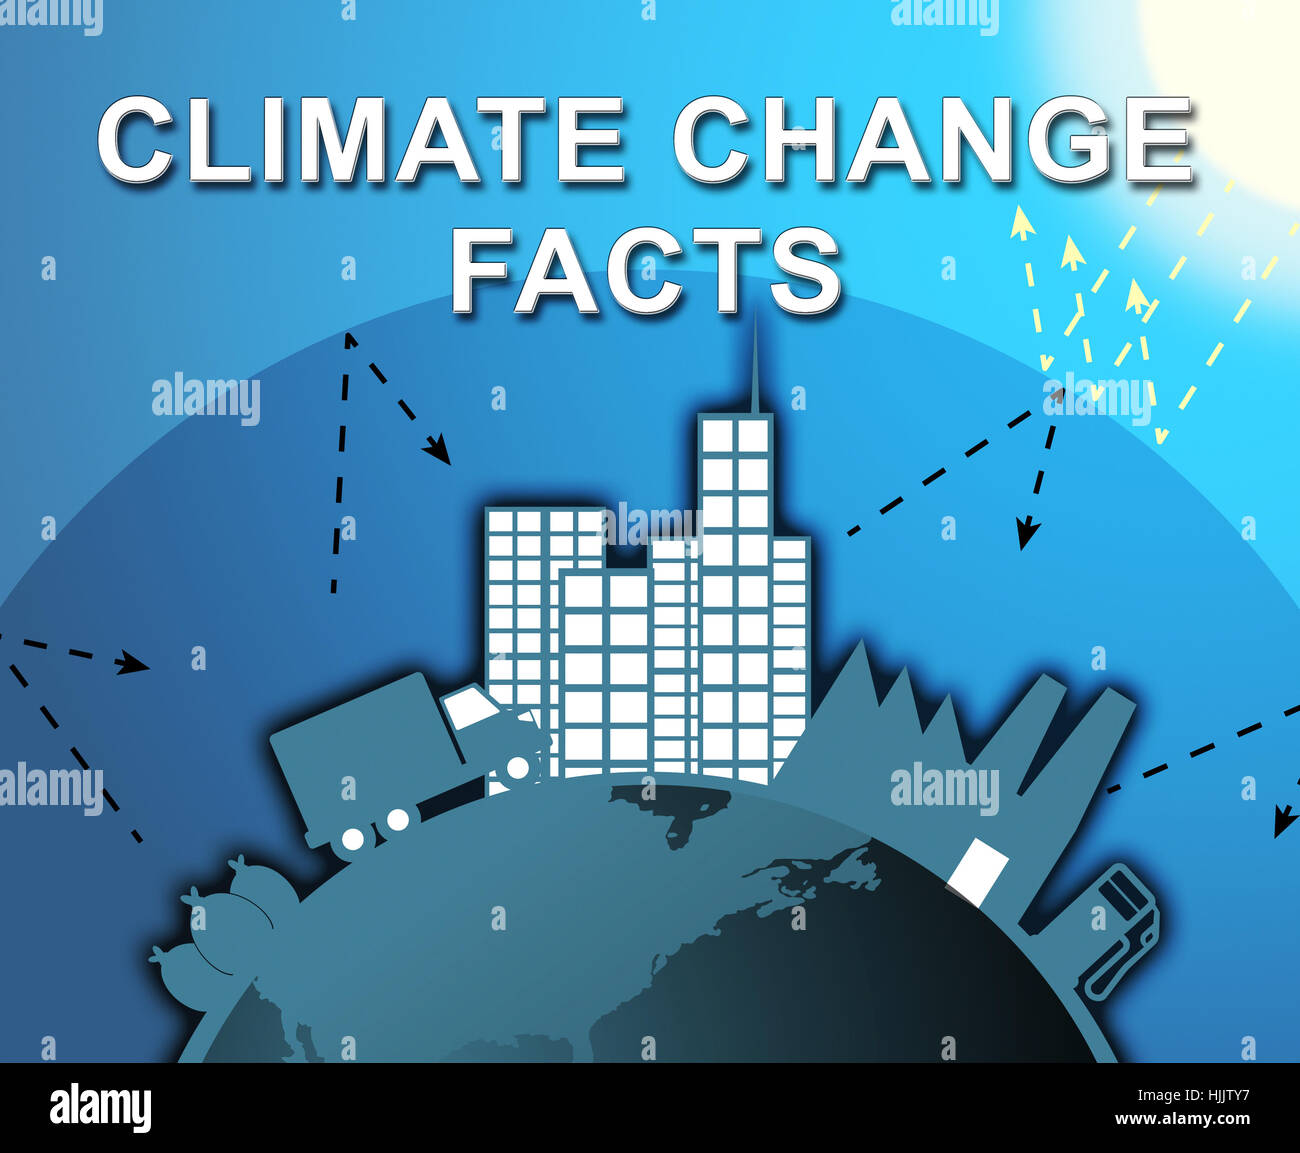 Climate Change Facts City Shows Global warming 3d Illustration Stock Photo